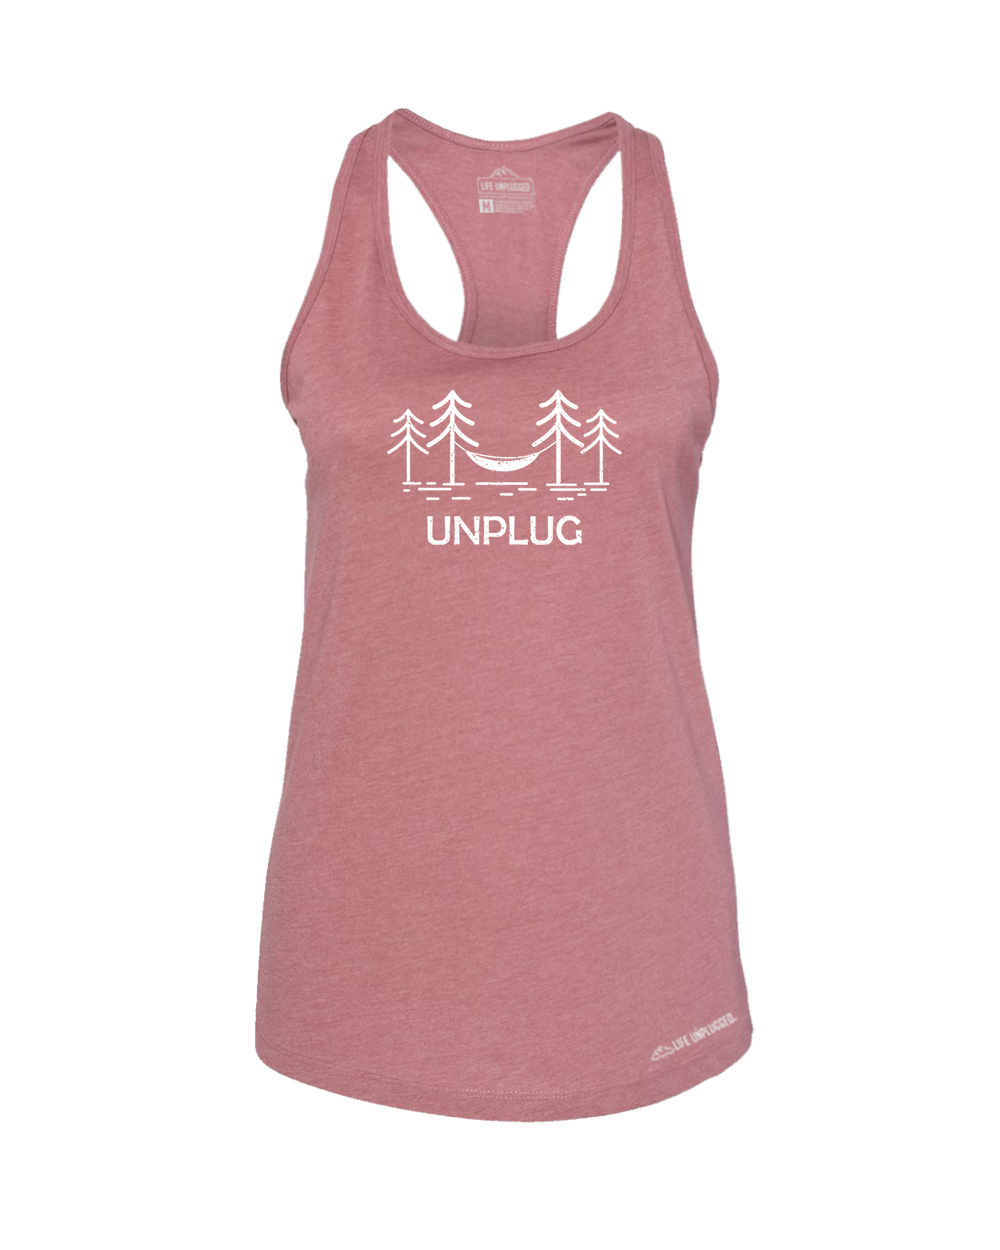 Hammocking Premium Women's Relaxed Fit Racerback Tank Top - Life Unplugged